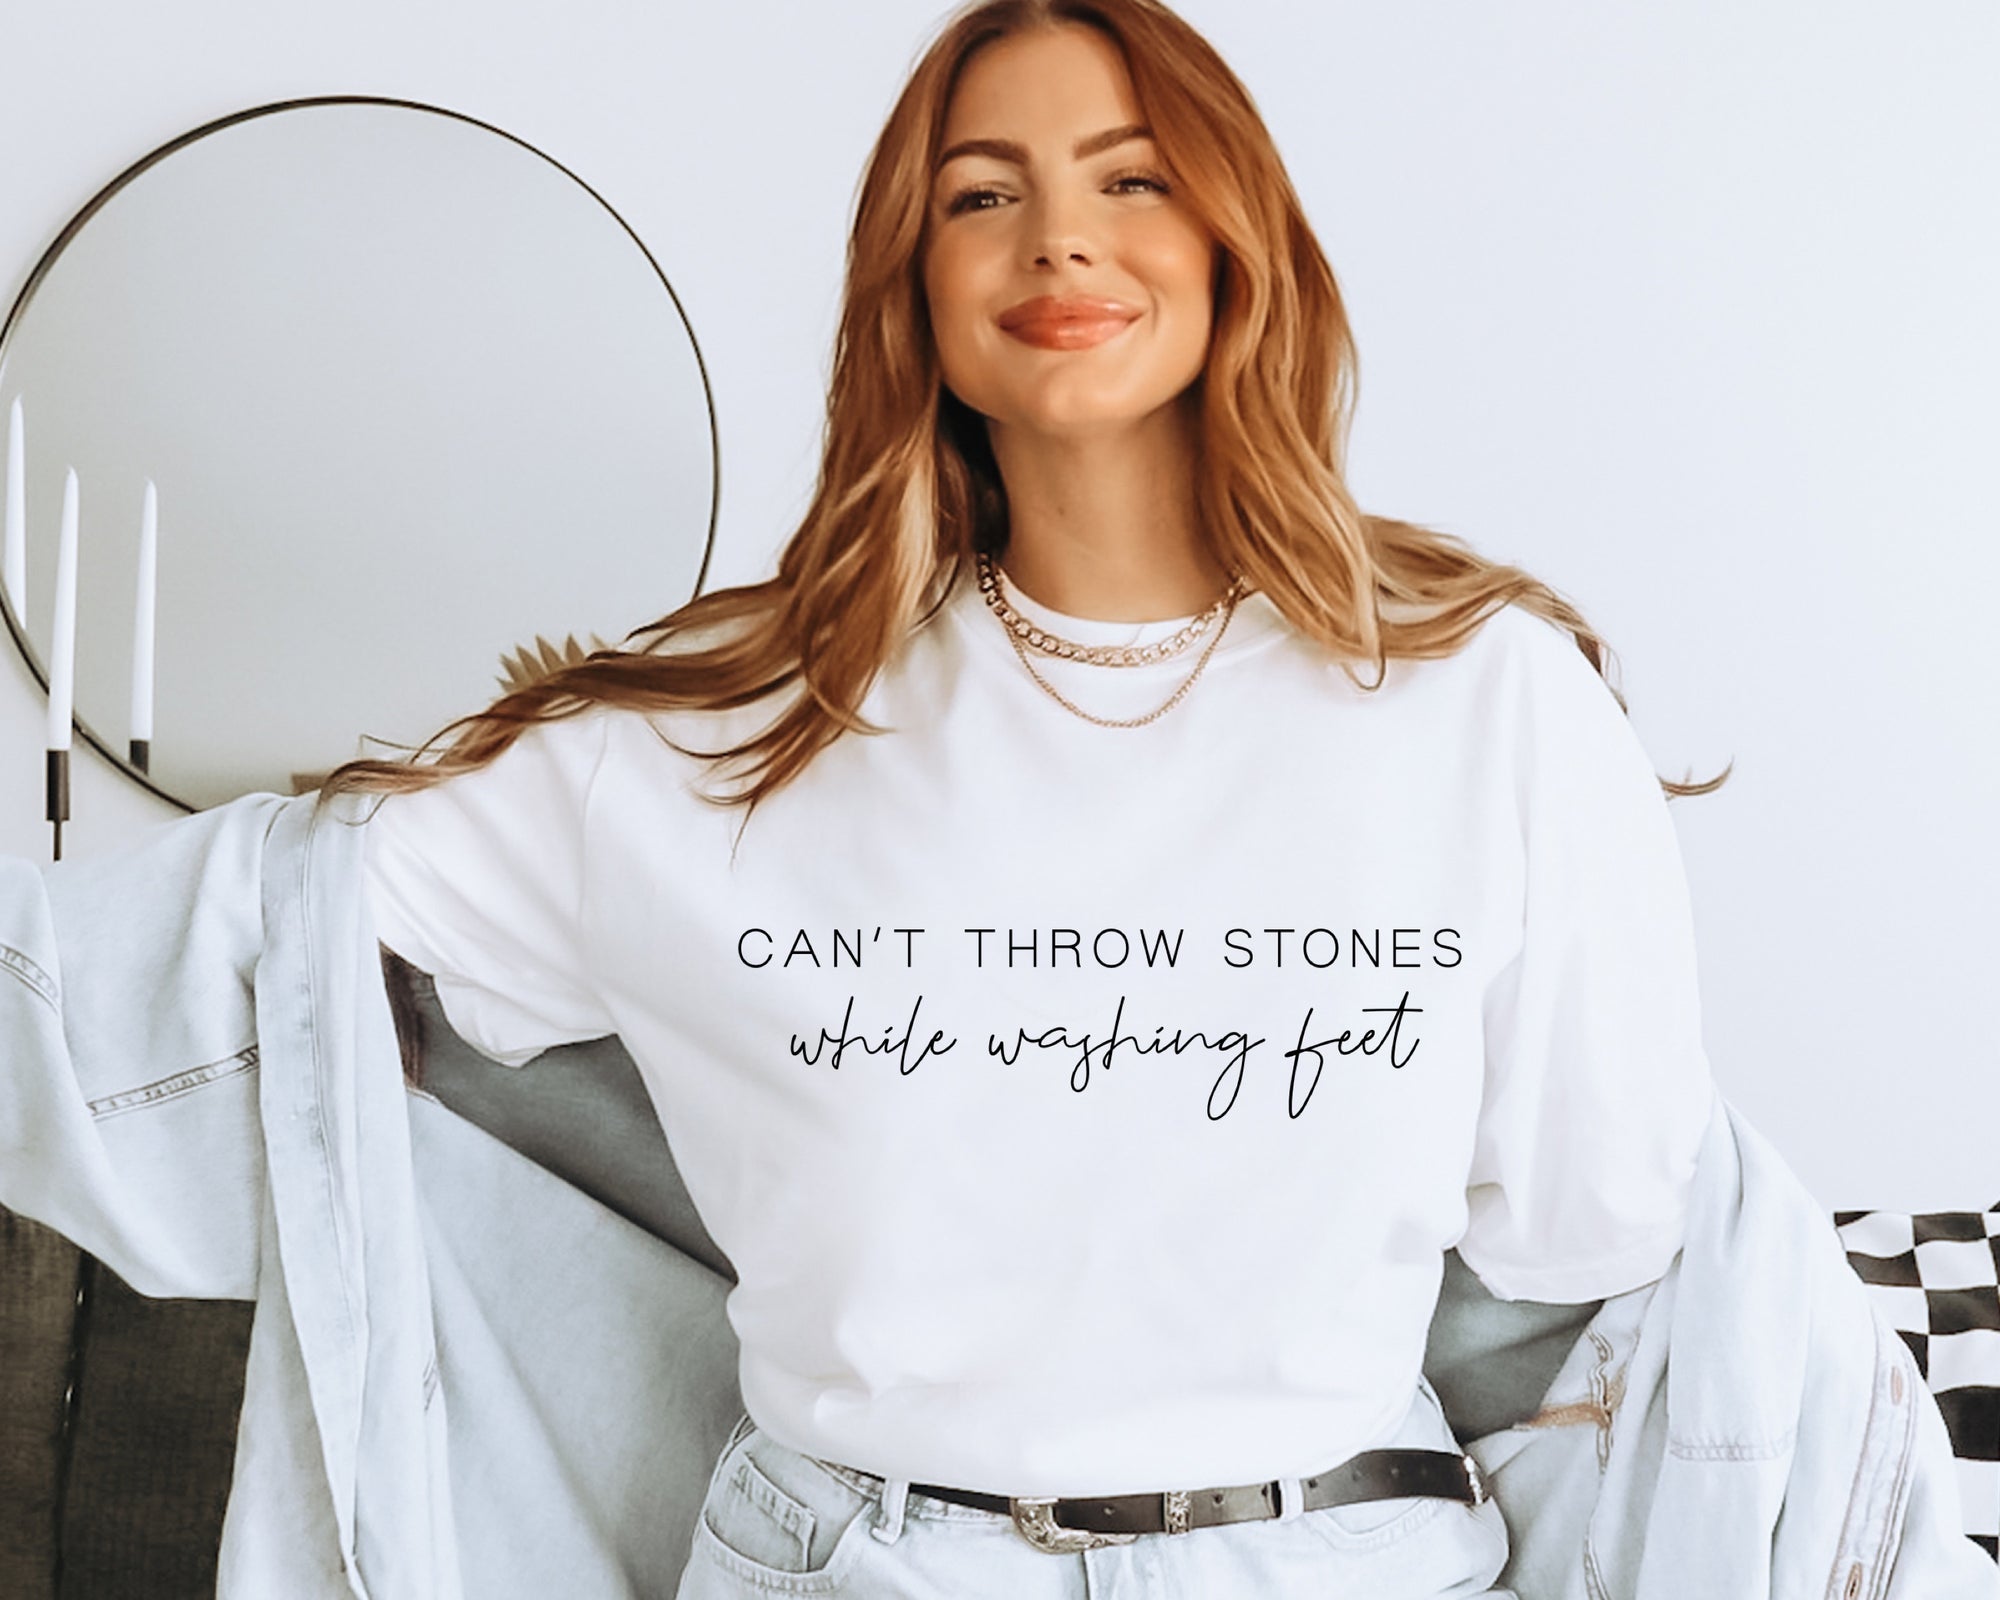 Can’t Throw Stones While Washing Feet T-Shirt - White